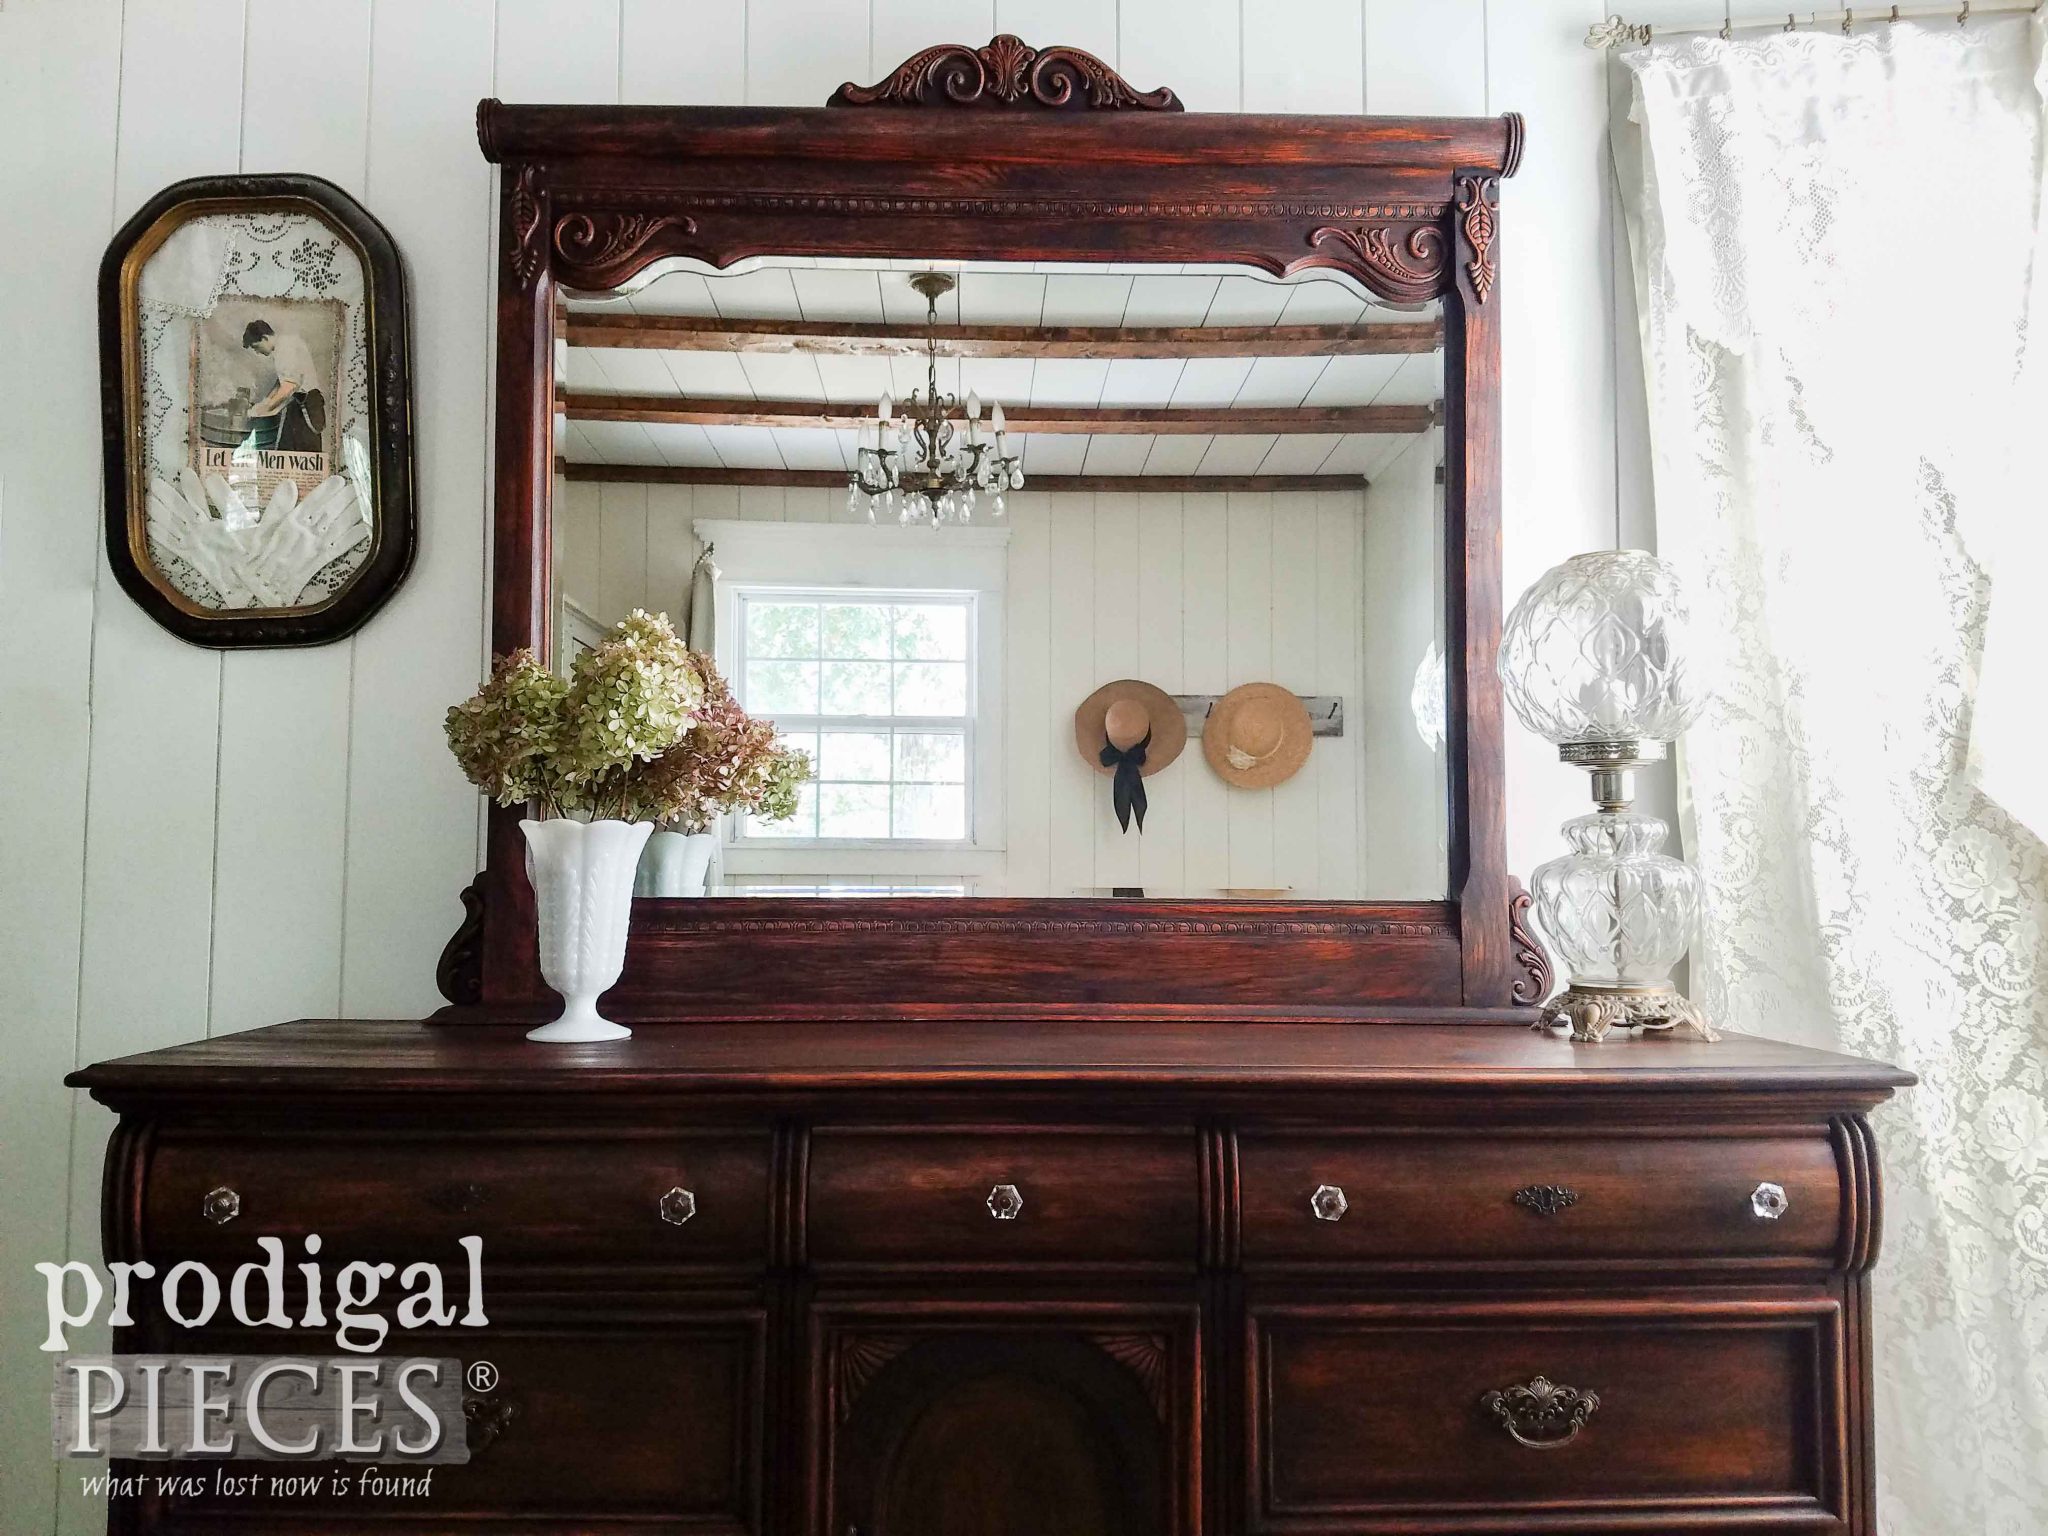 Mirrored Lexington Dresser gets New Look to create Updated Furniture by Prodigal Pieces | prodigalpieces.com